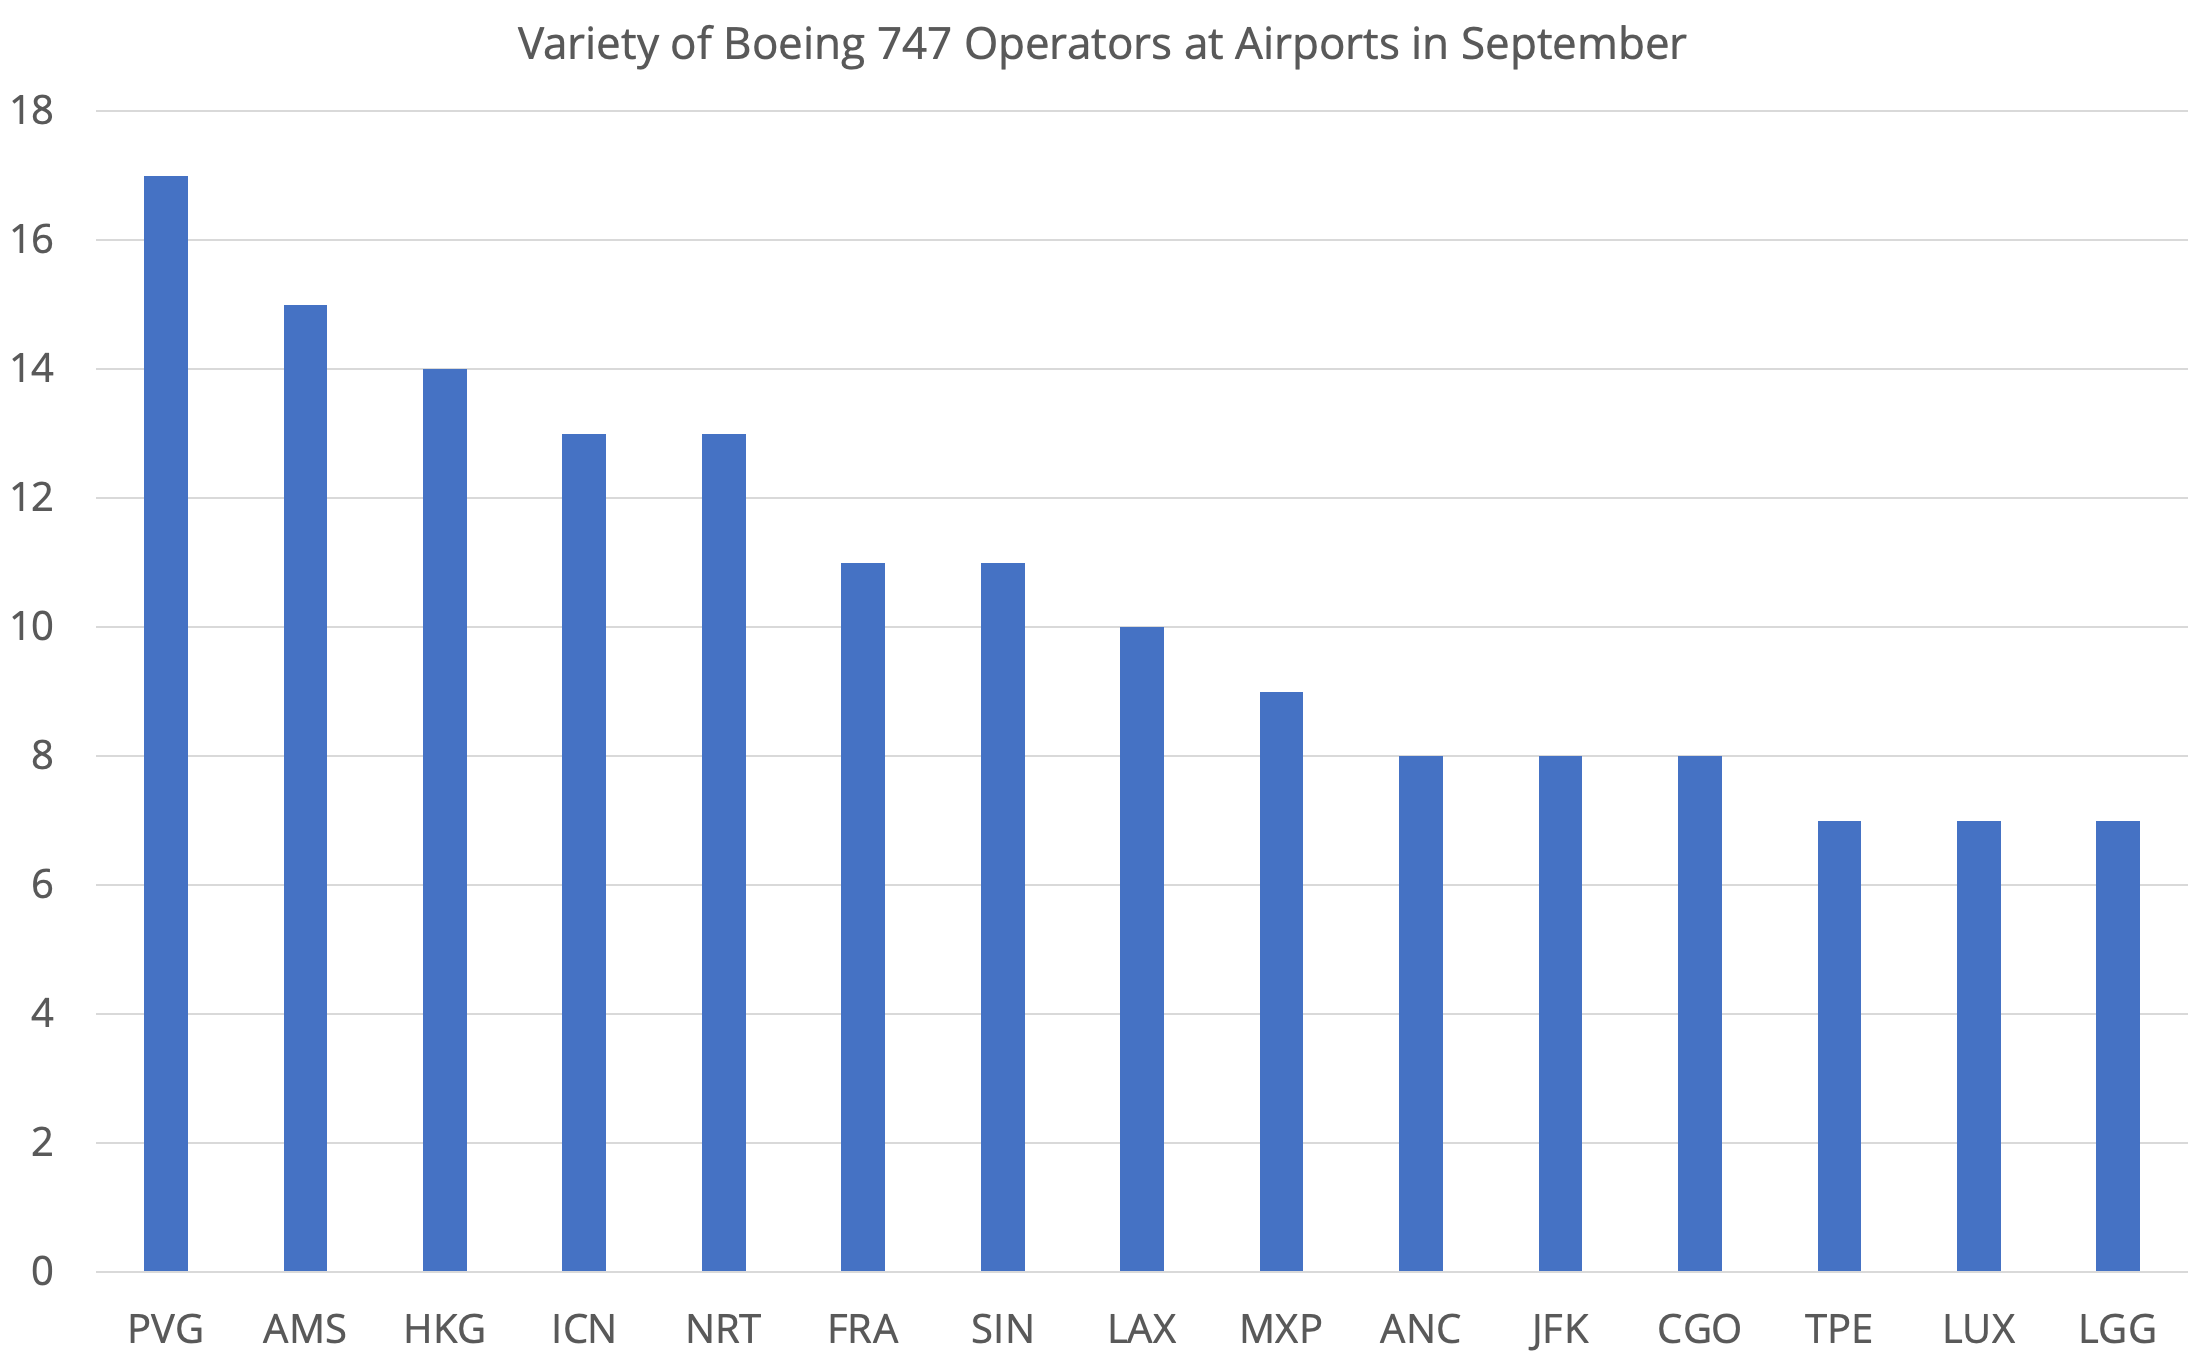 Greatest variety of 747s at airports in September